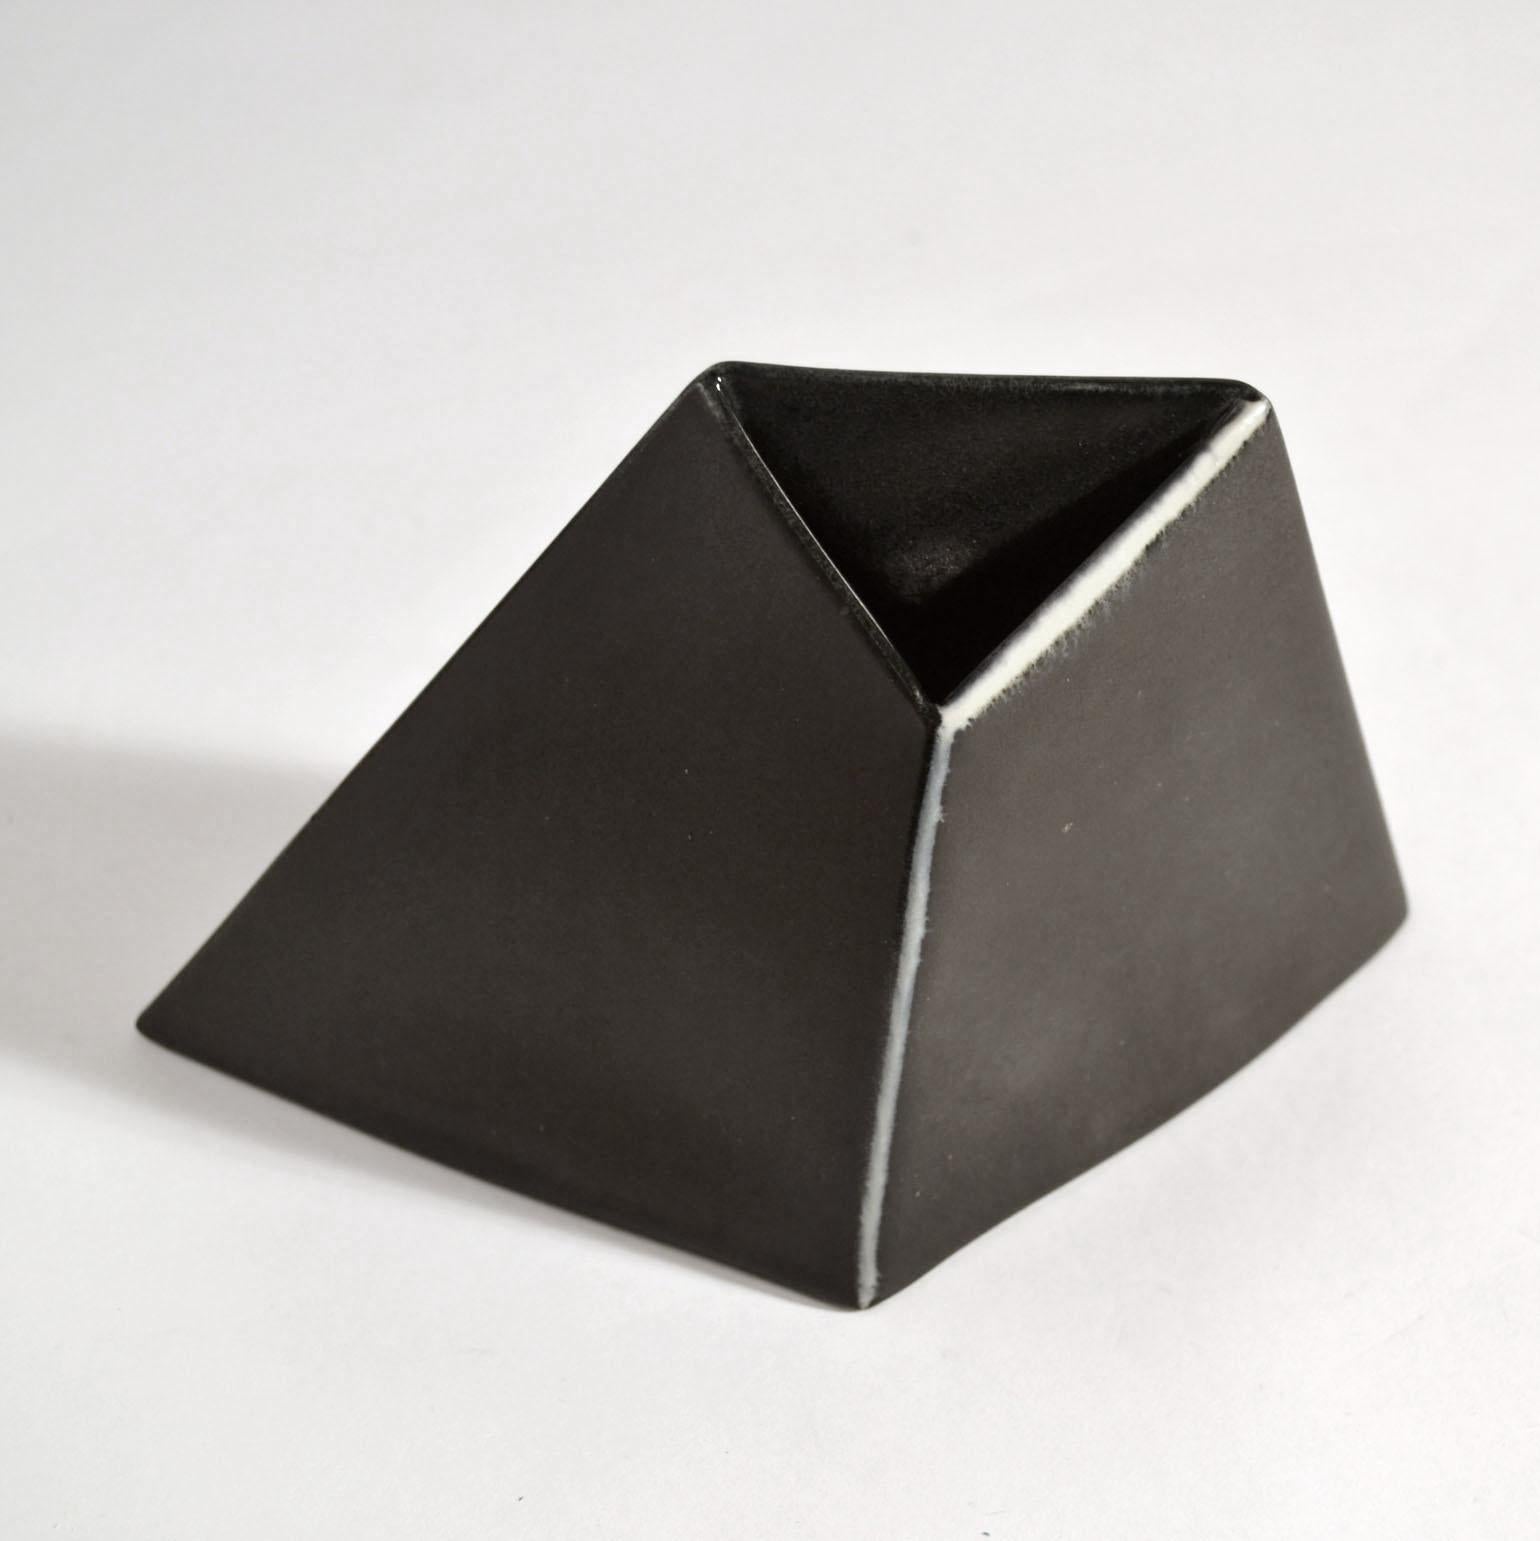 Minimalist Triangular Black and White Ceramic Bowls and Vases For Sale 1